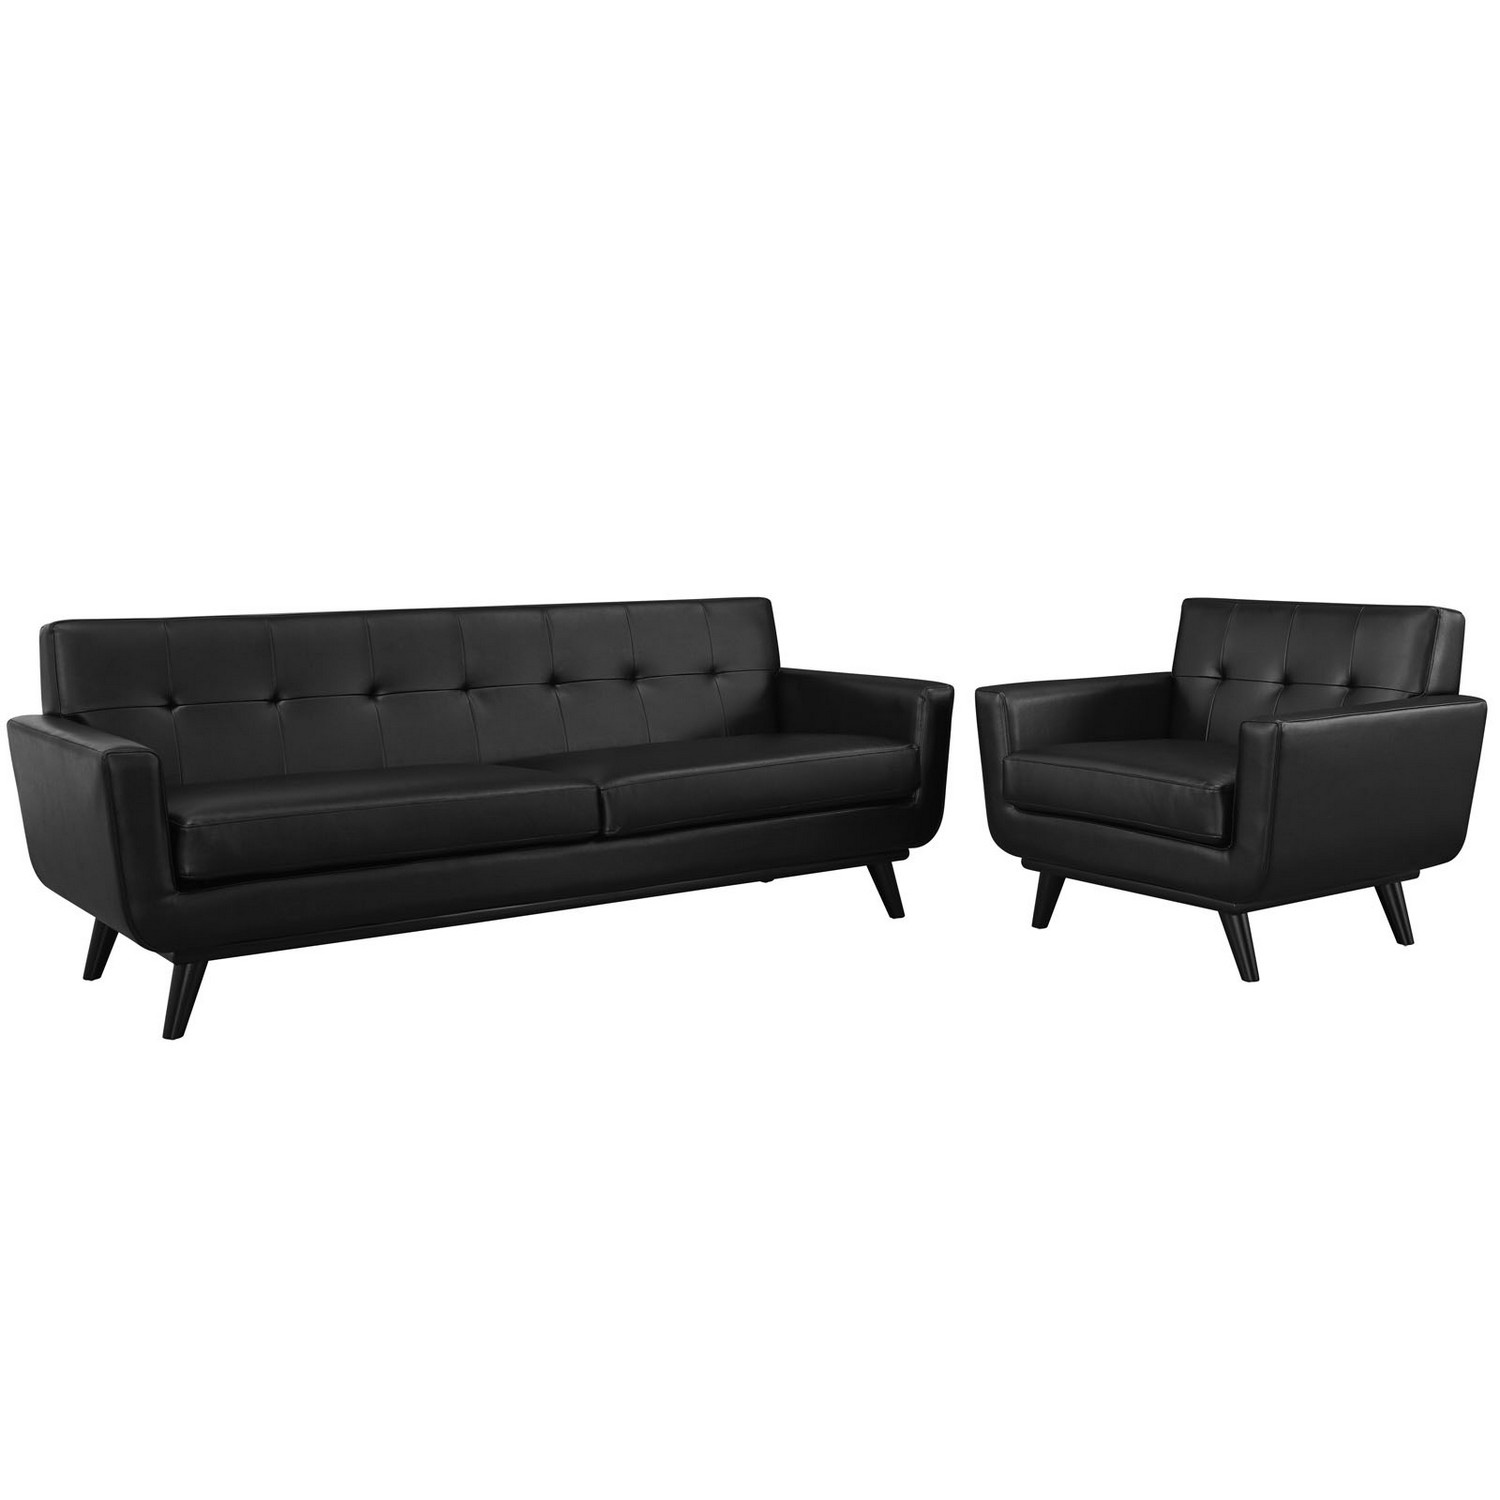 Modway Engage 2 Piece Leather Living Room Set - Black